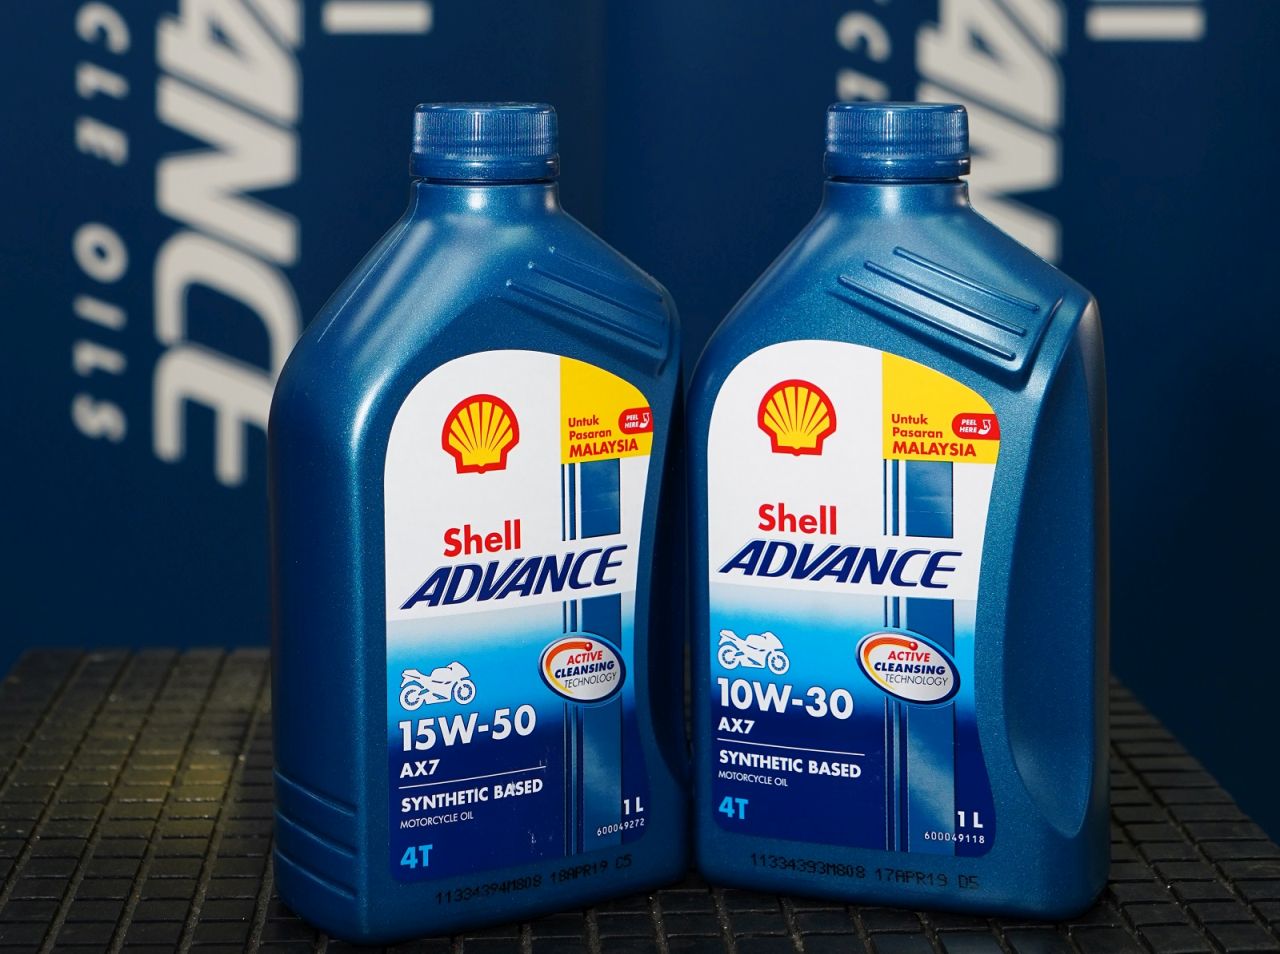 New 'made For Malaysia' Shell Advance Ax7 10w 30 And 15w 50 (4)